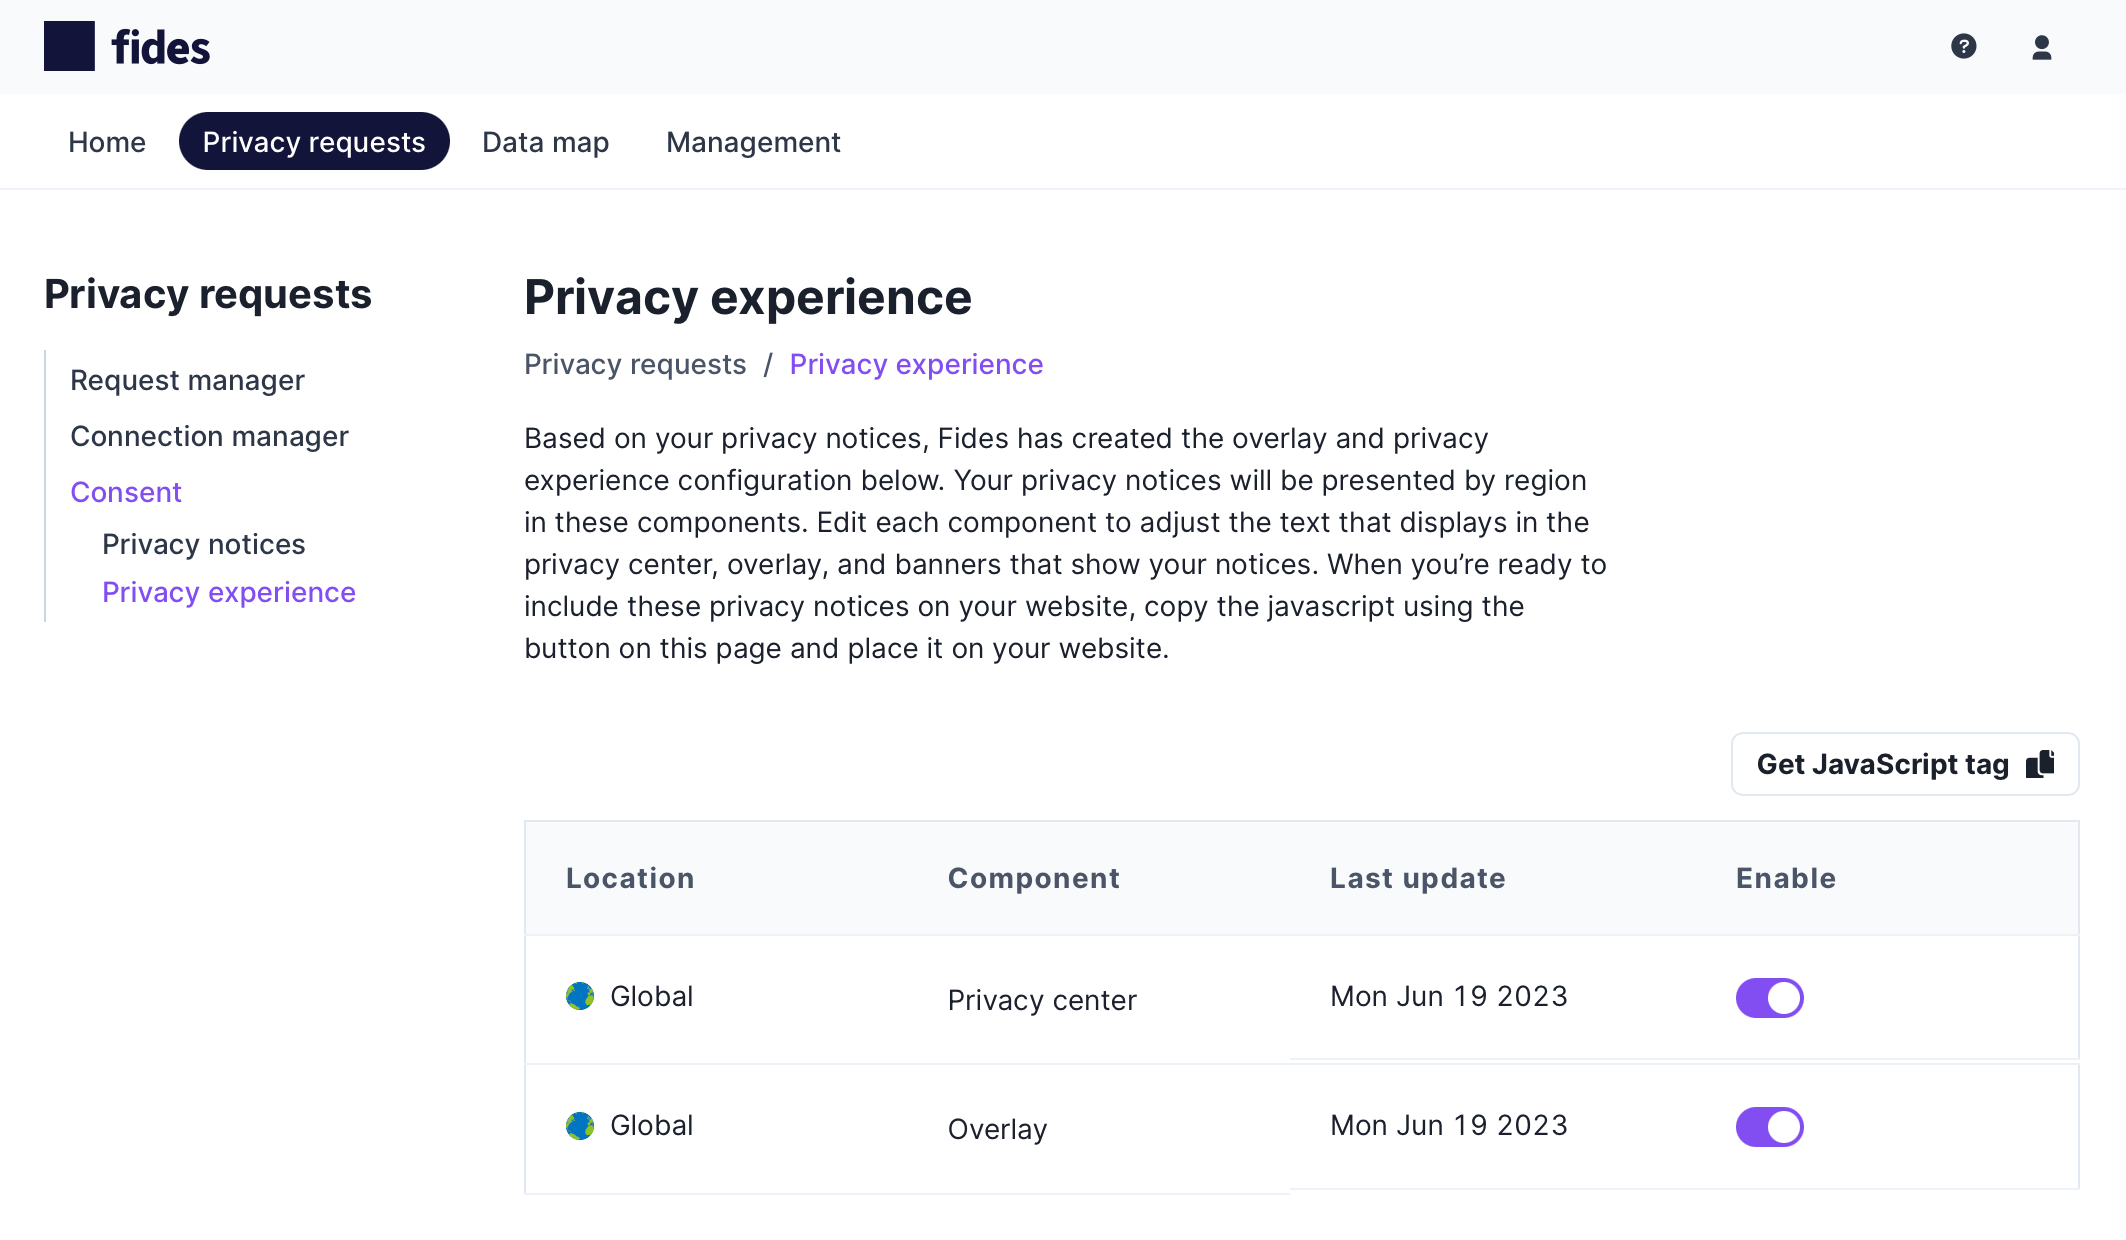 View all Privacy Experiences